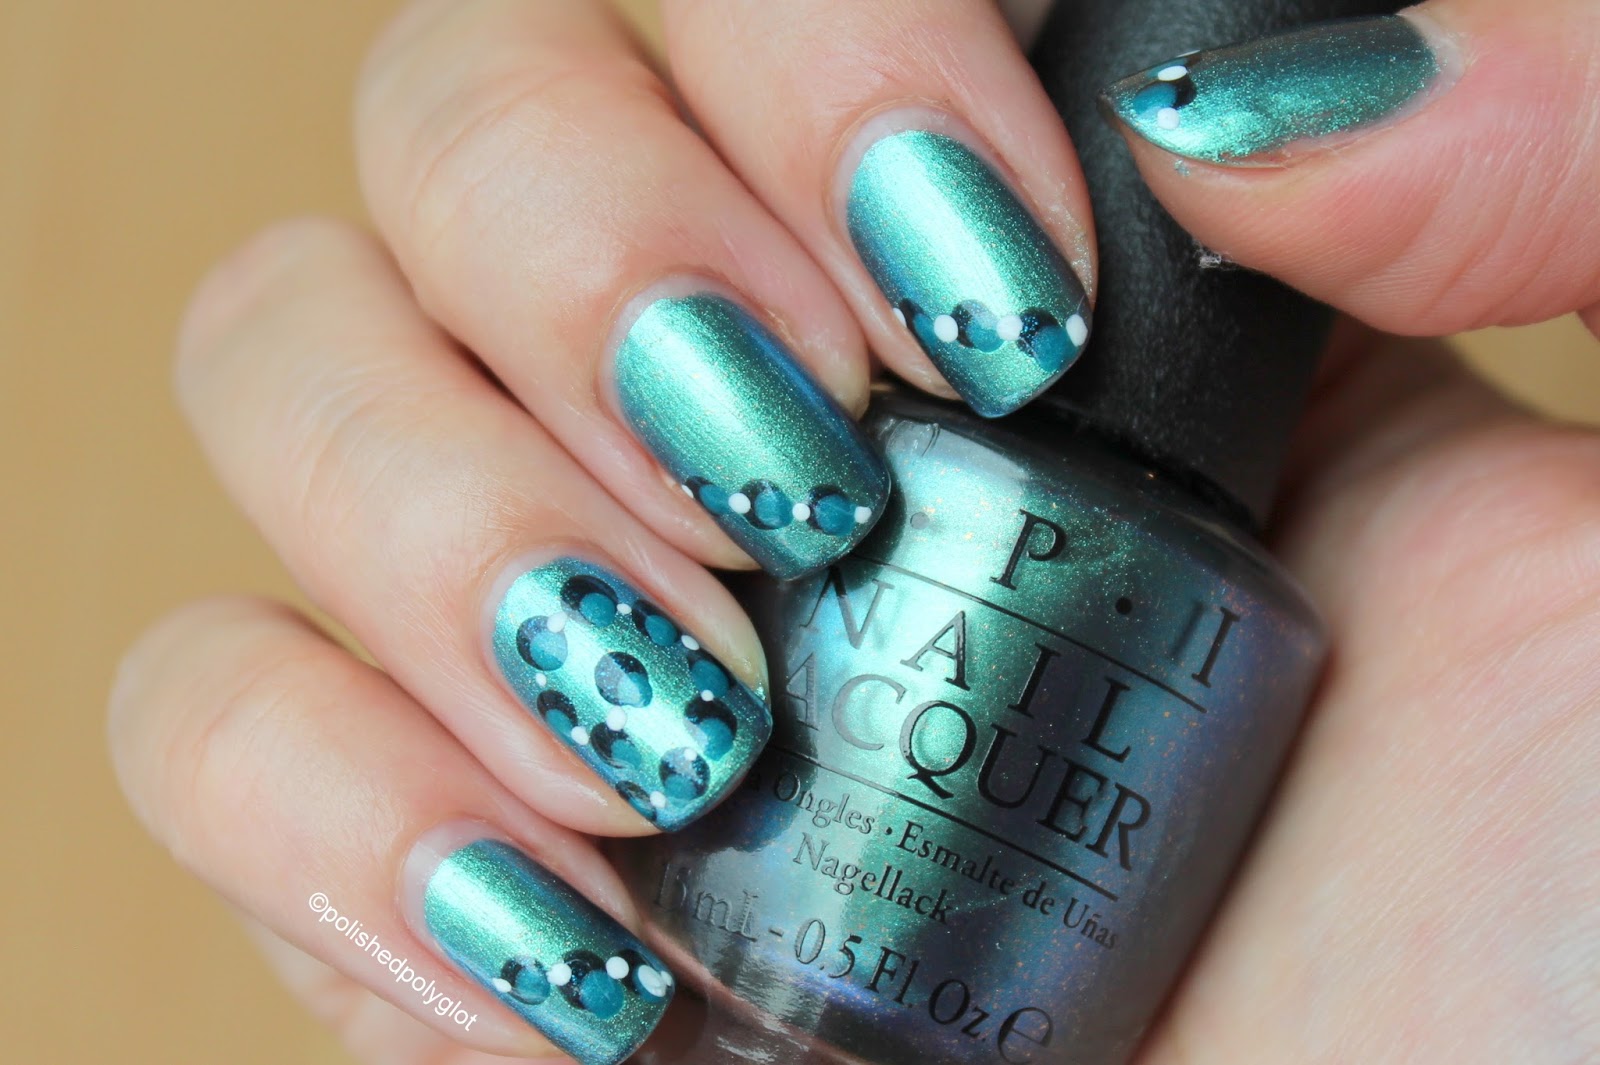 4. Teal and Silver Striped Nail Art - wide 4